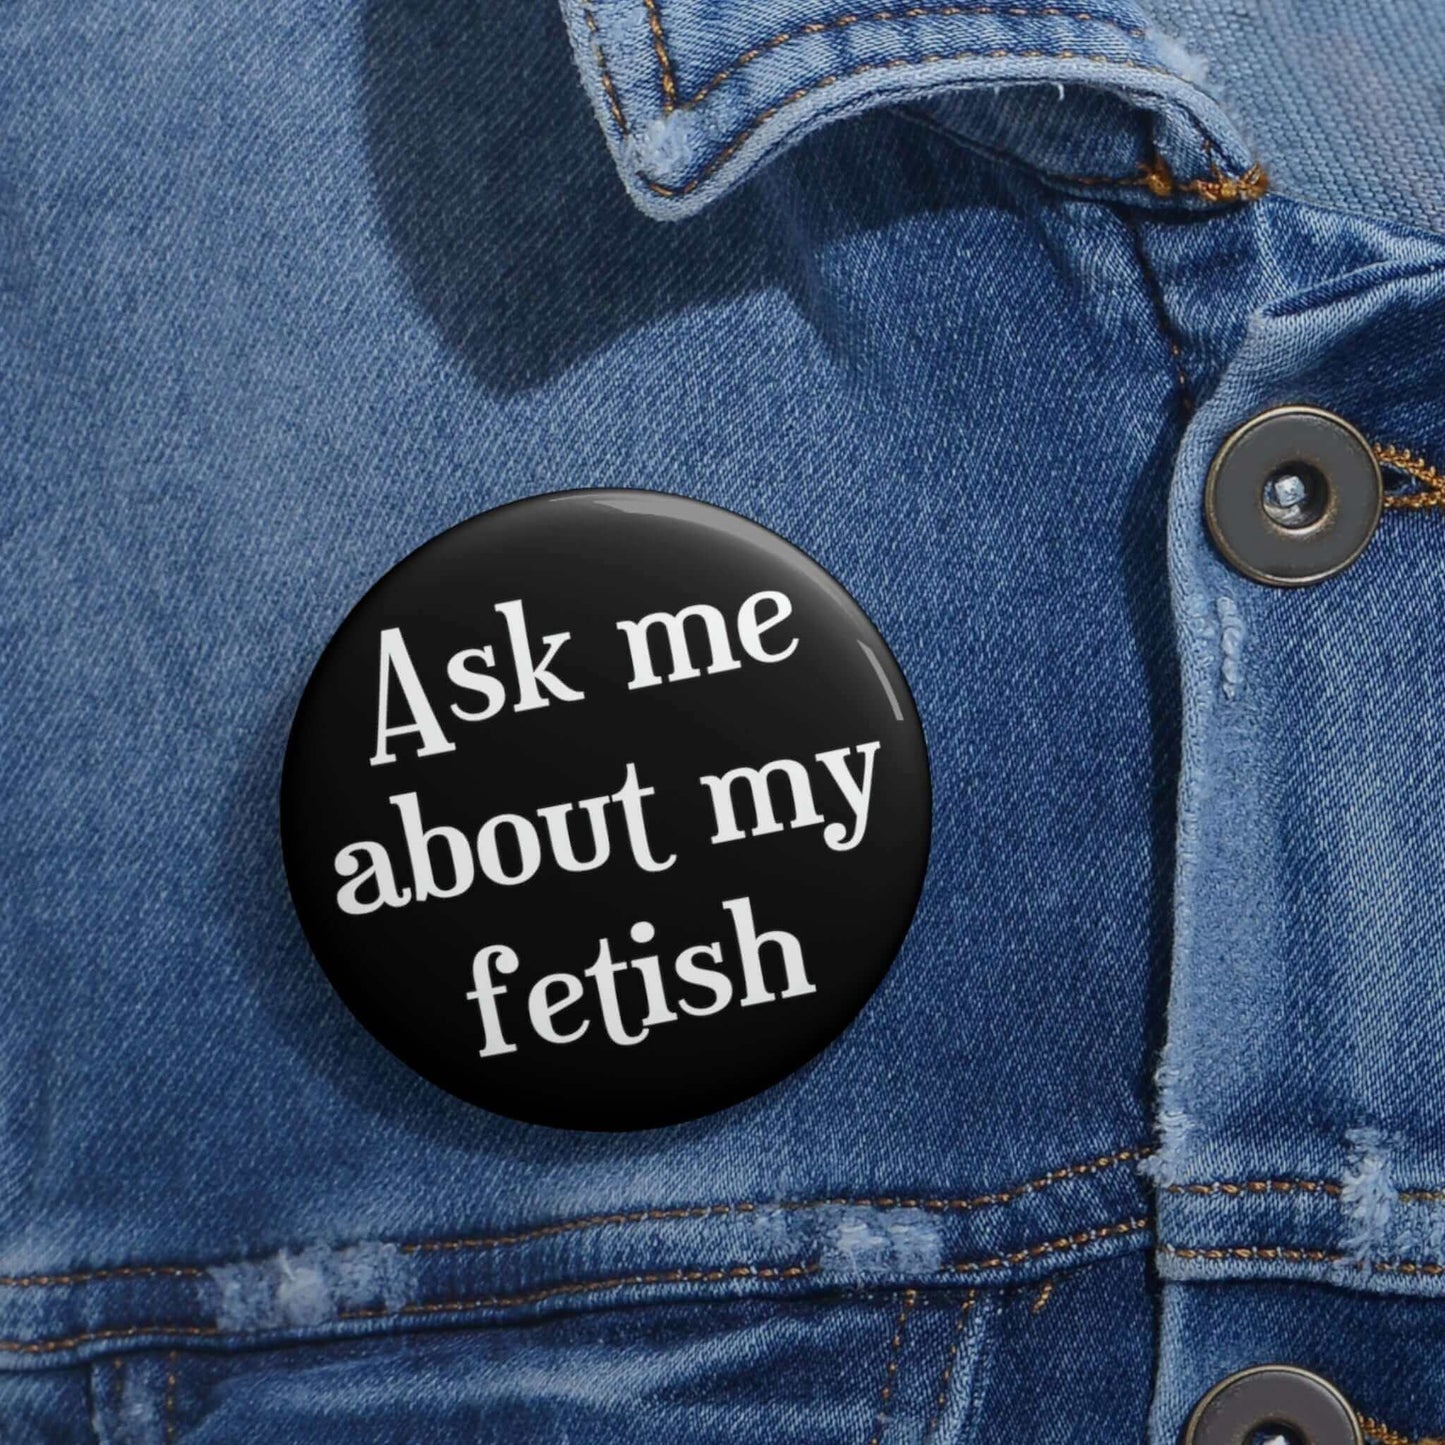 Ask me about my fetish pinback button